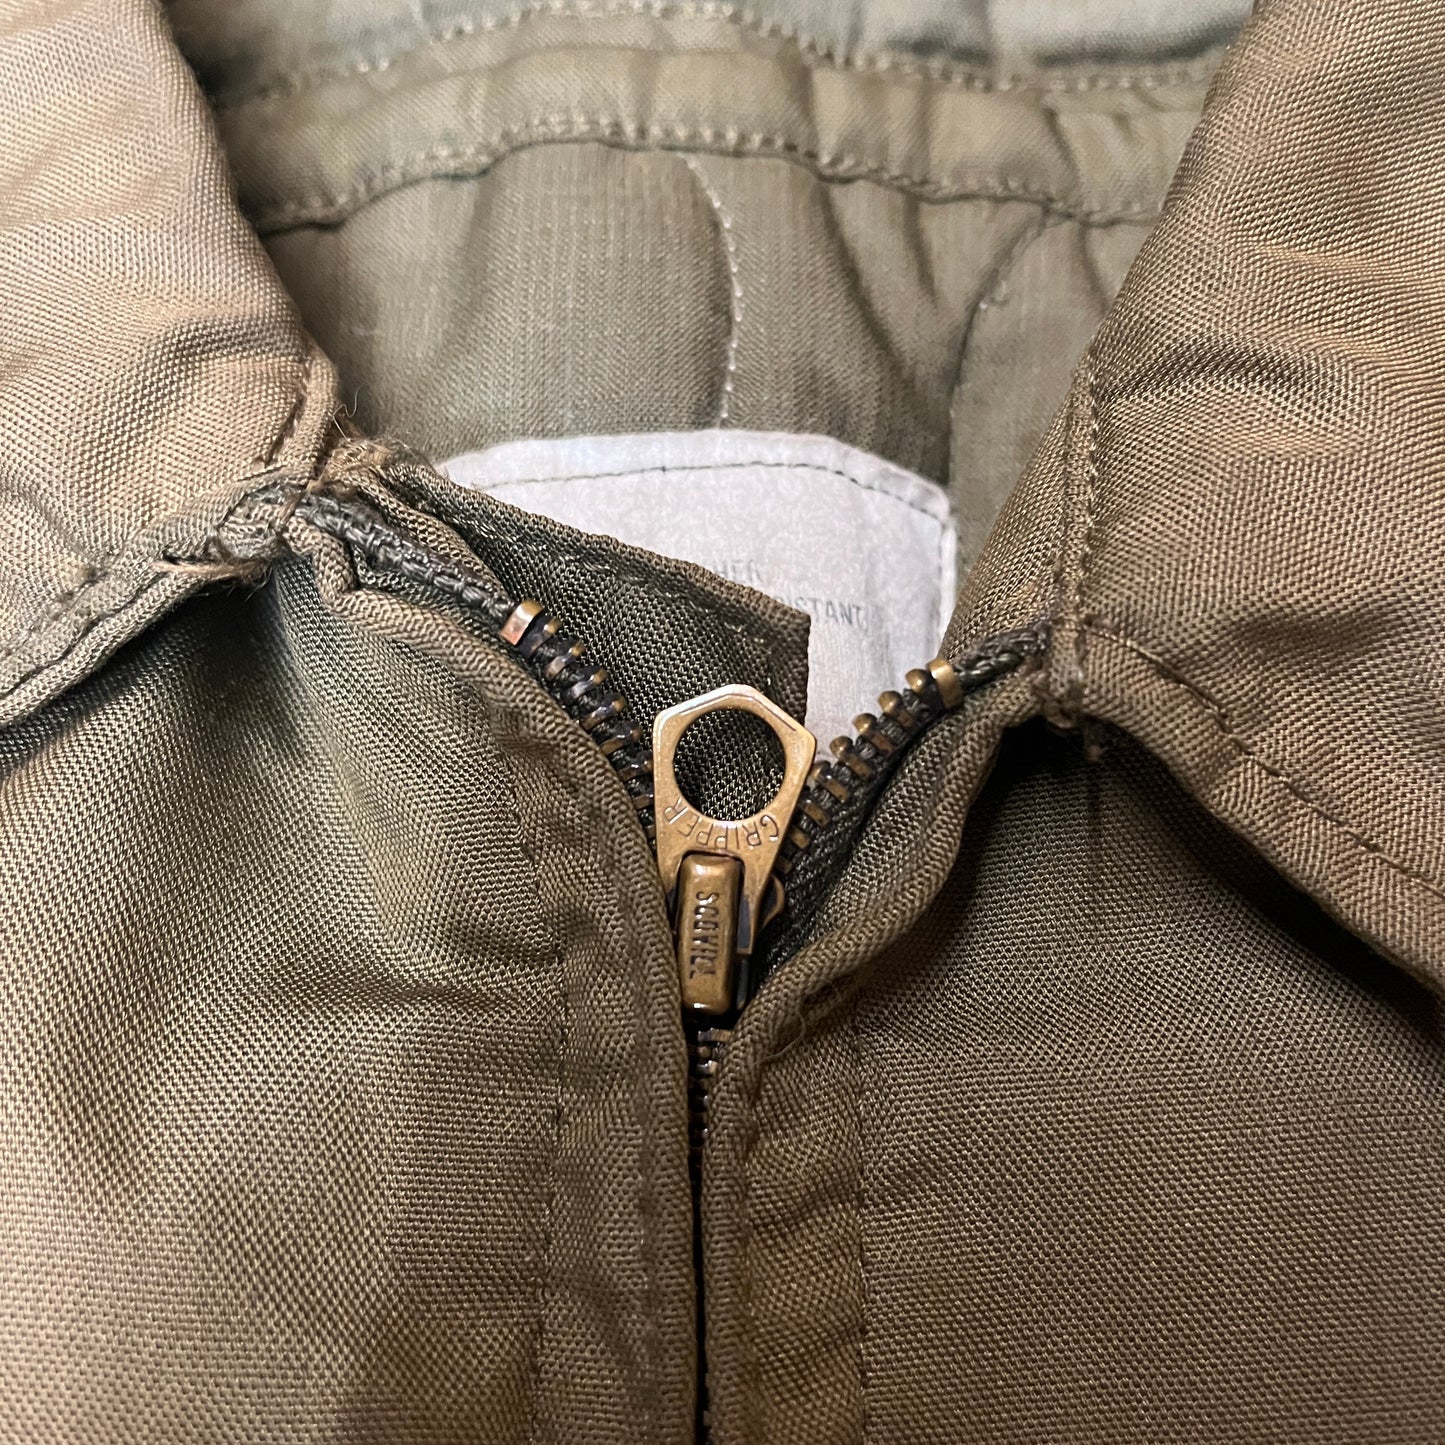 US Army 1970s 1980s Bomber Jacket With Scovill "Gripper" Zipper